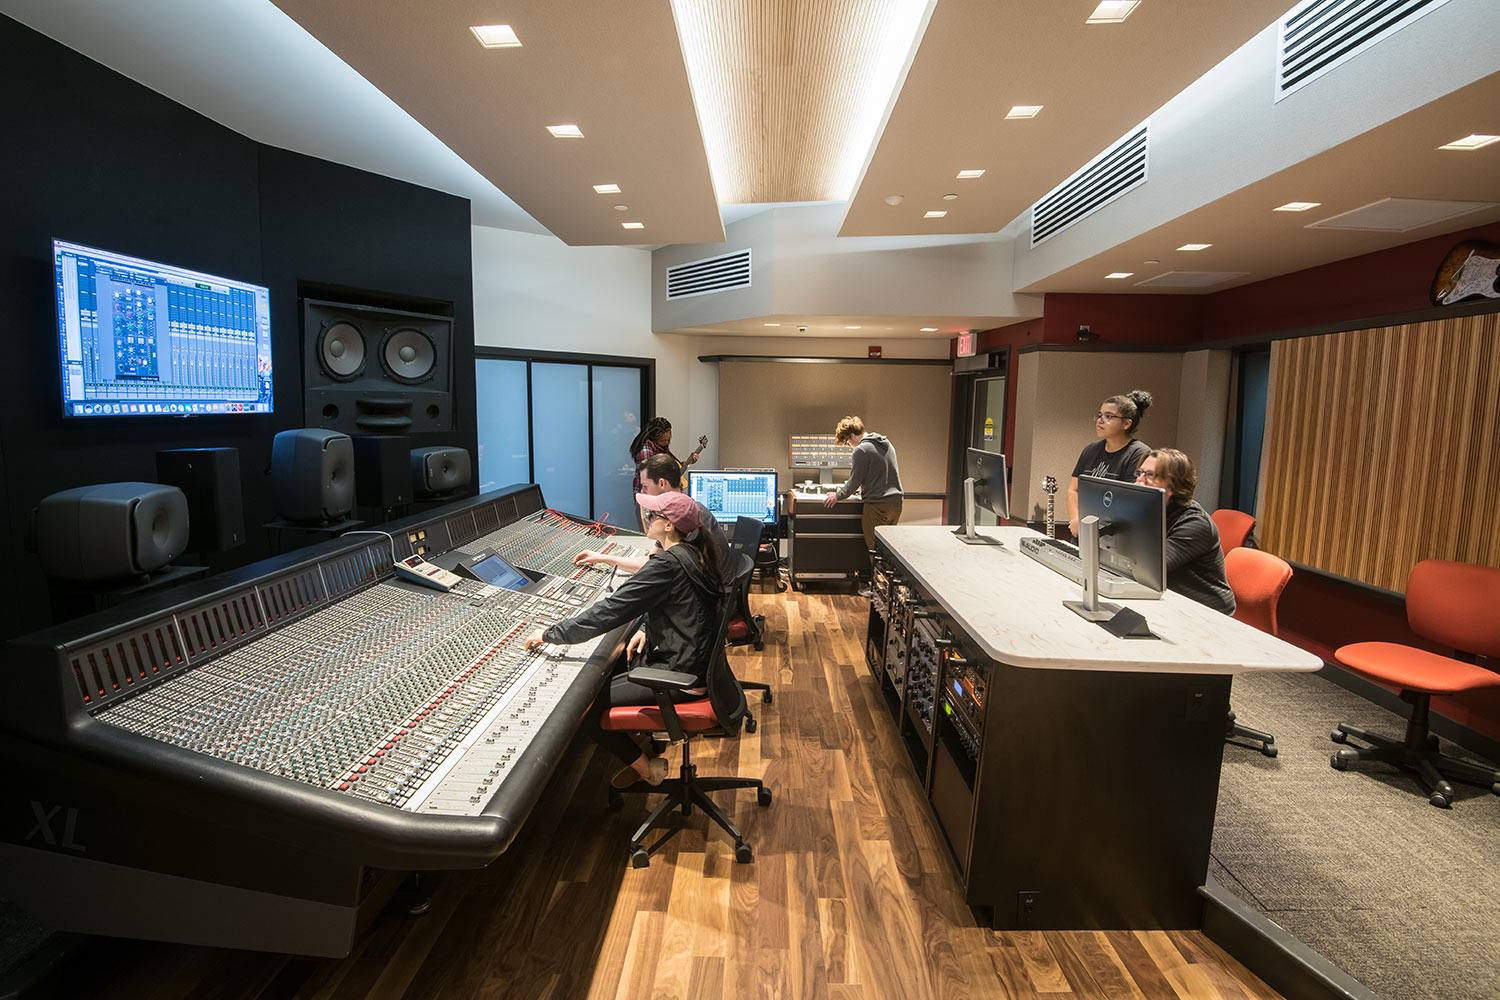 Montgomery County Community College in Blue Bell, PA brand-new Recording Studio for their Digital Music Technology course. Designed by WSDG. Architectural acoustics and media systems engineering. Control Room with MCCC students.